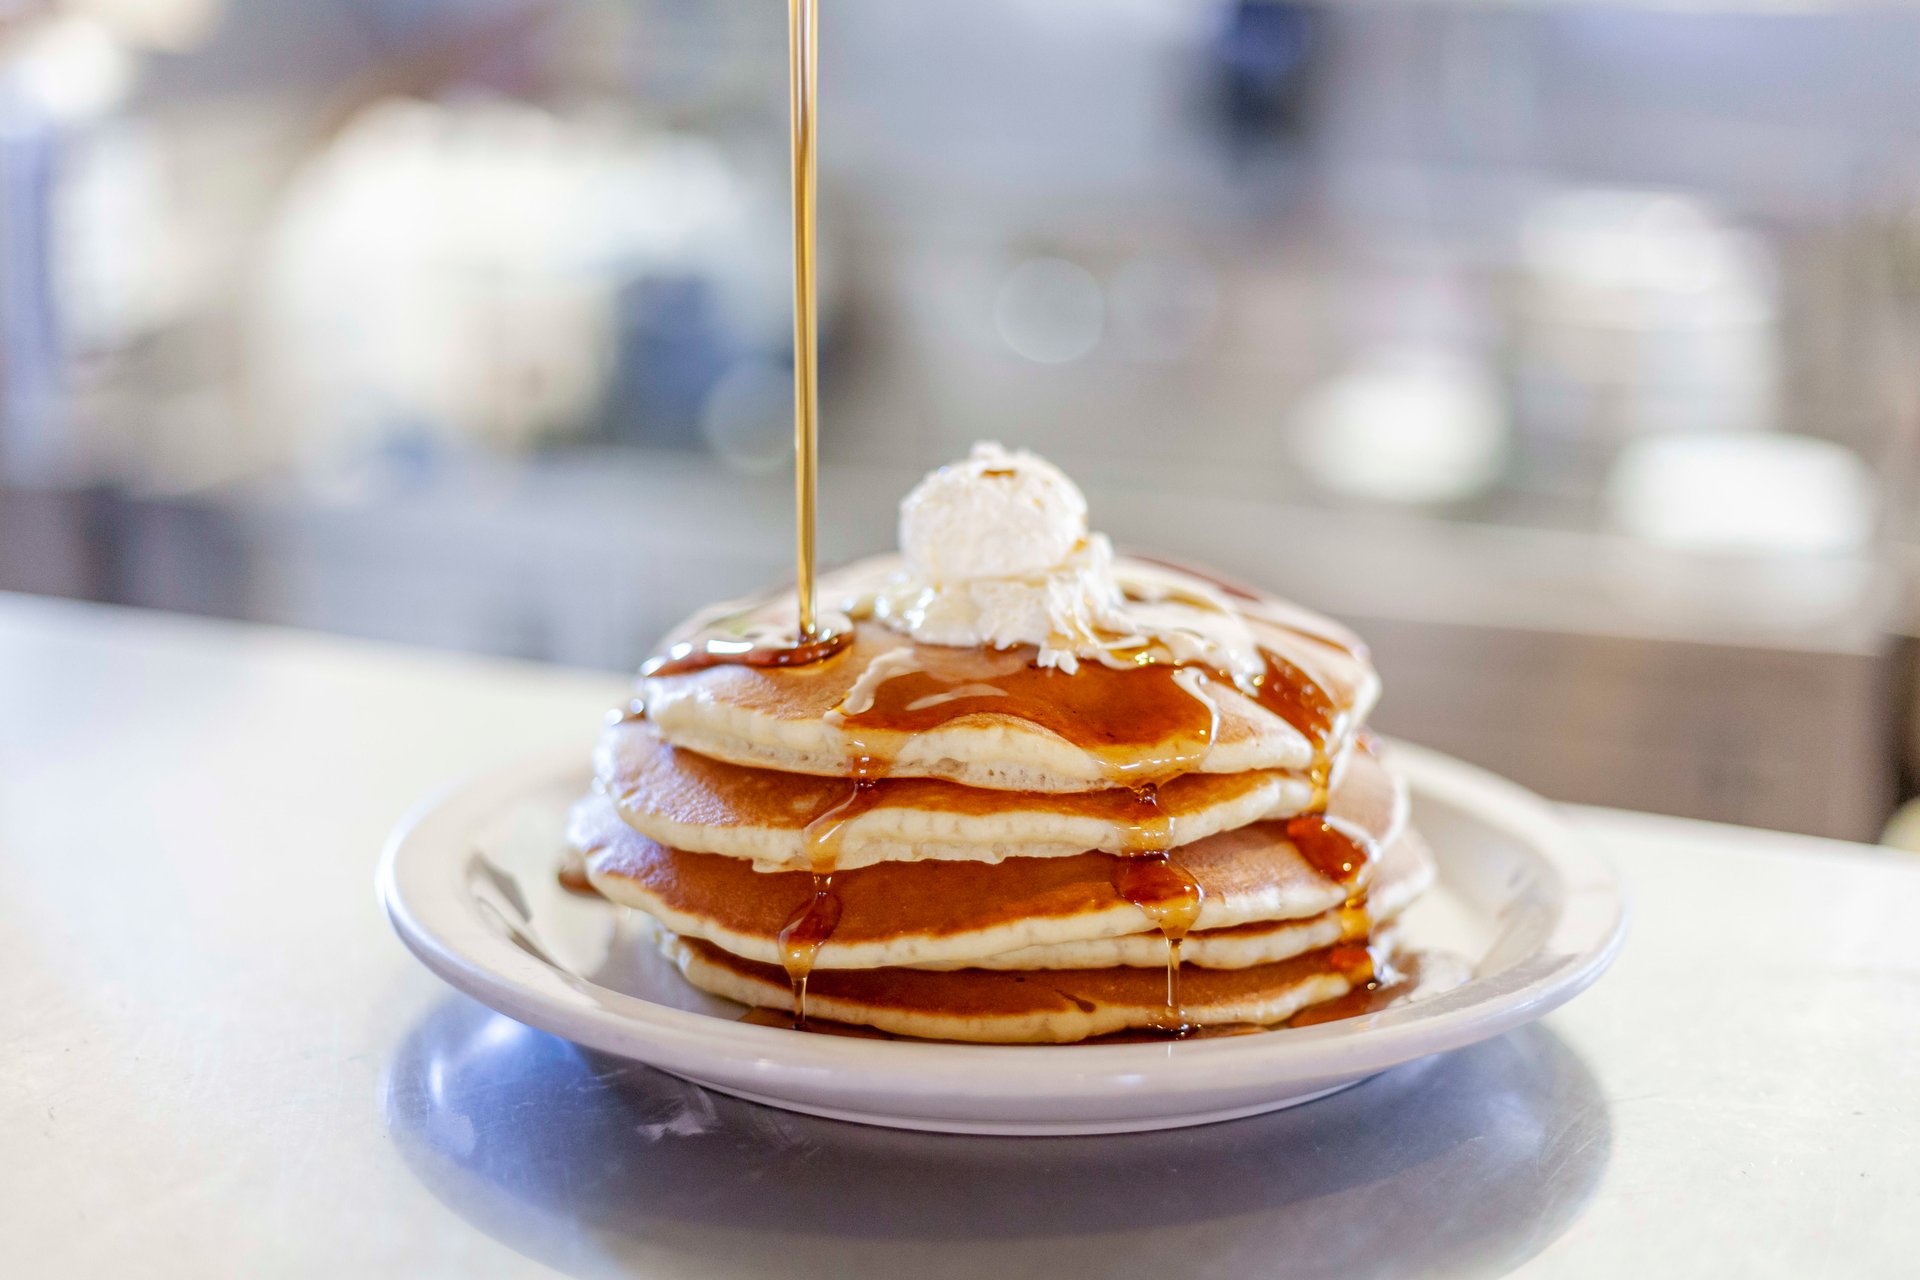 The international house of pancakes in New York: 1 reviews and 1